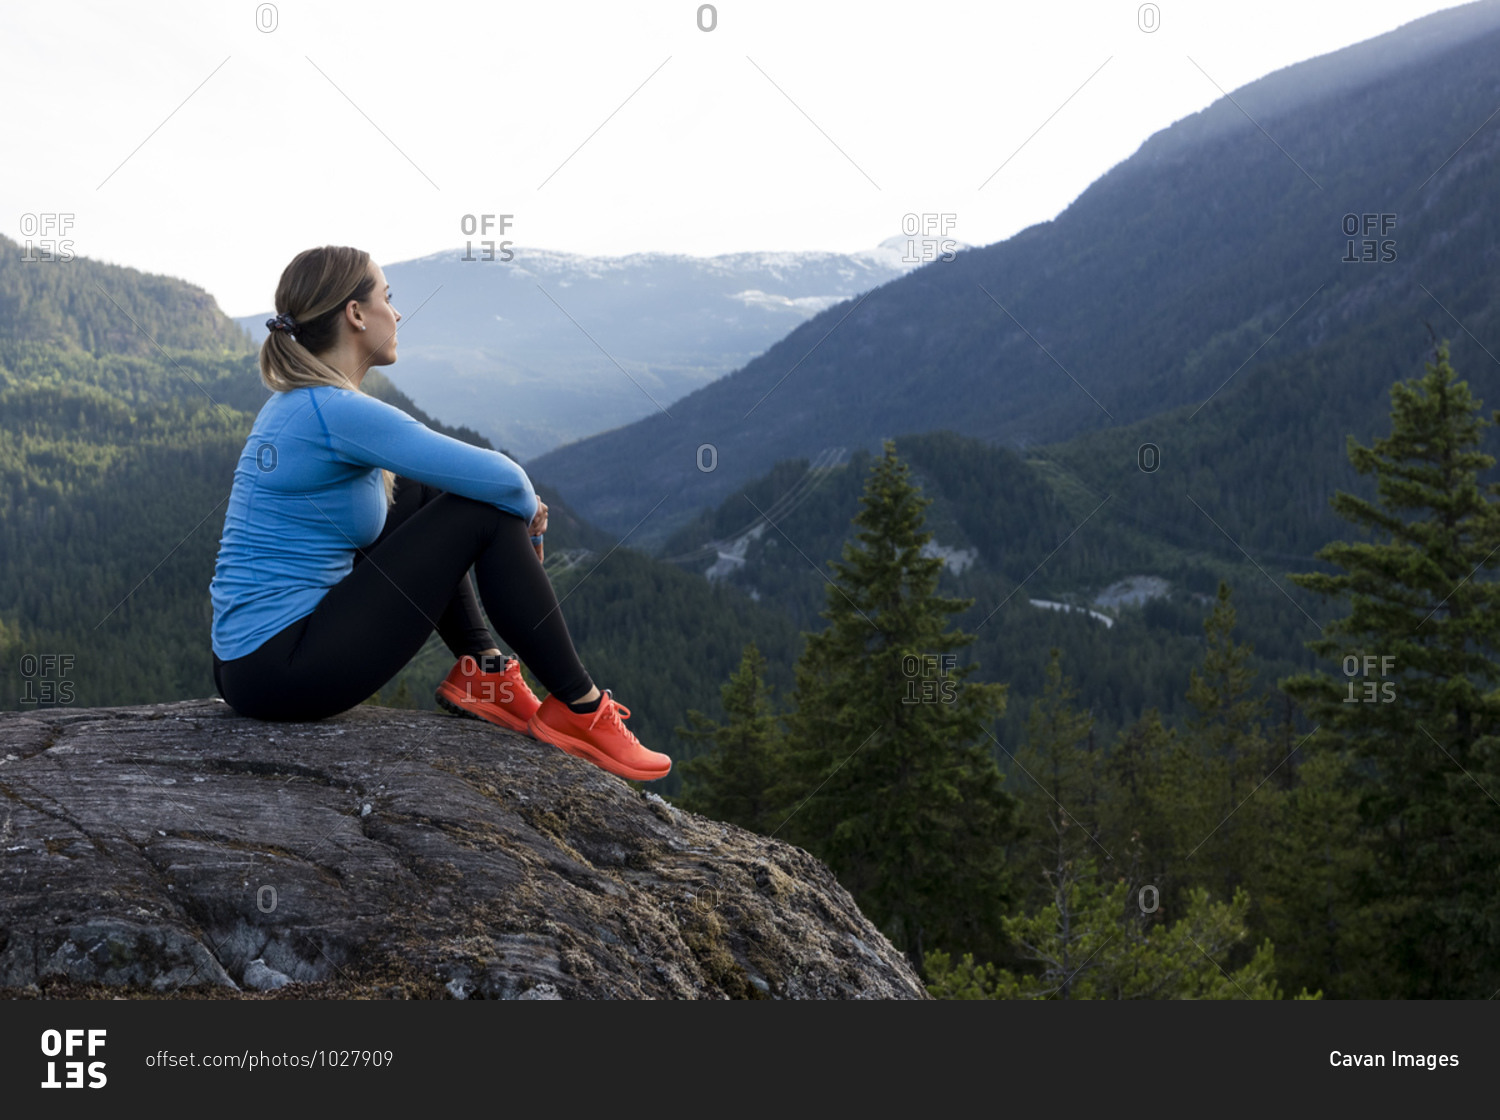 Strong sportswoman sitting and taking a break from trail running against forested mountain ridge during fitness workout in countryside